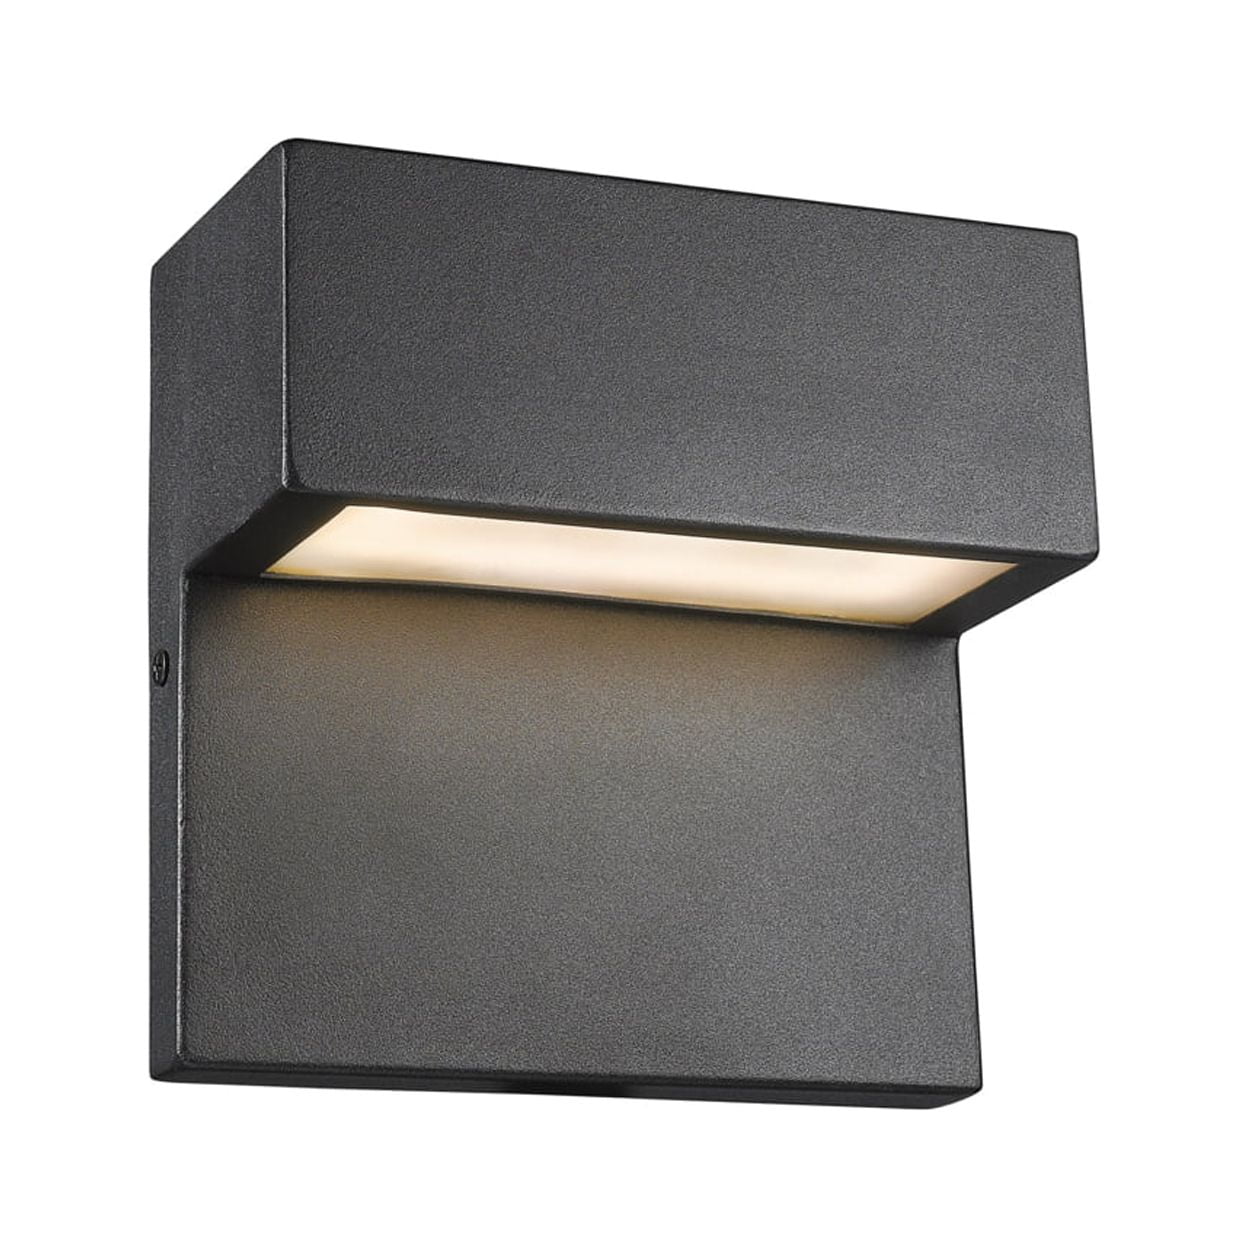 Ch2r902bk06-odl Campbell Contemporary Led Light Textured Black Outdoor Wall Sconce - 6 In.